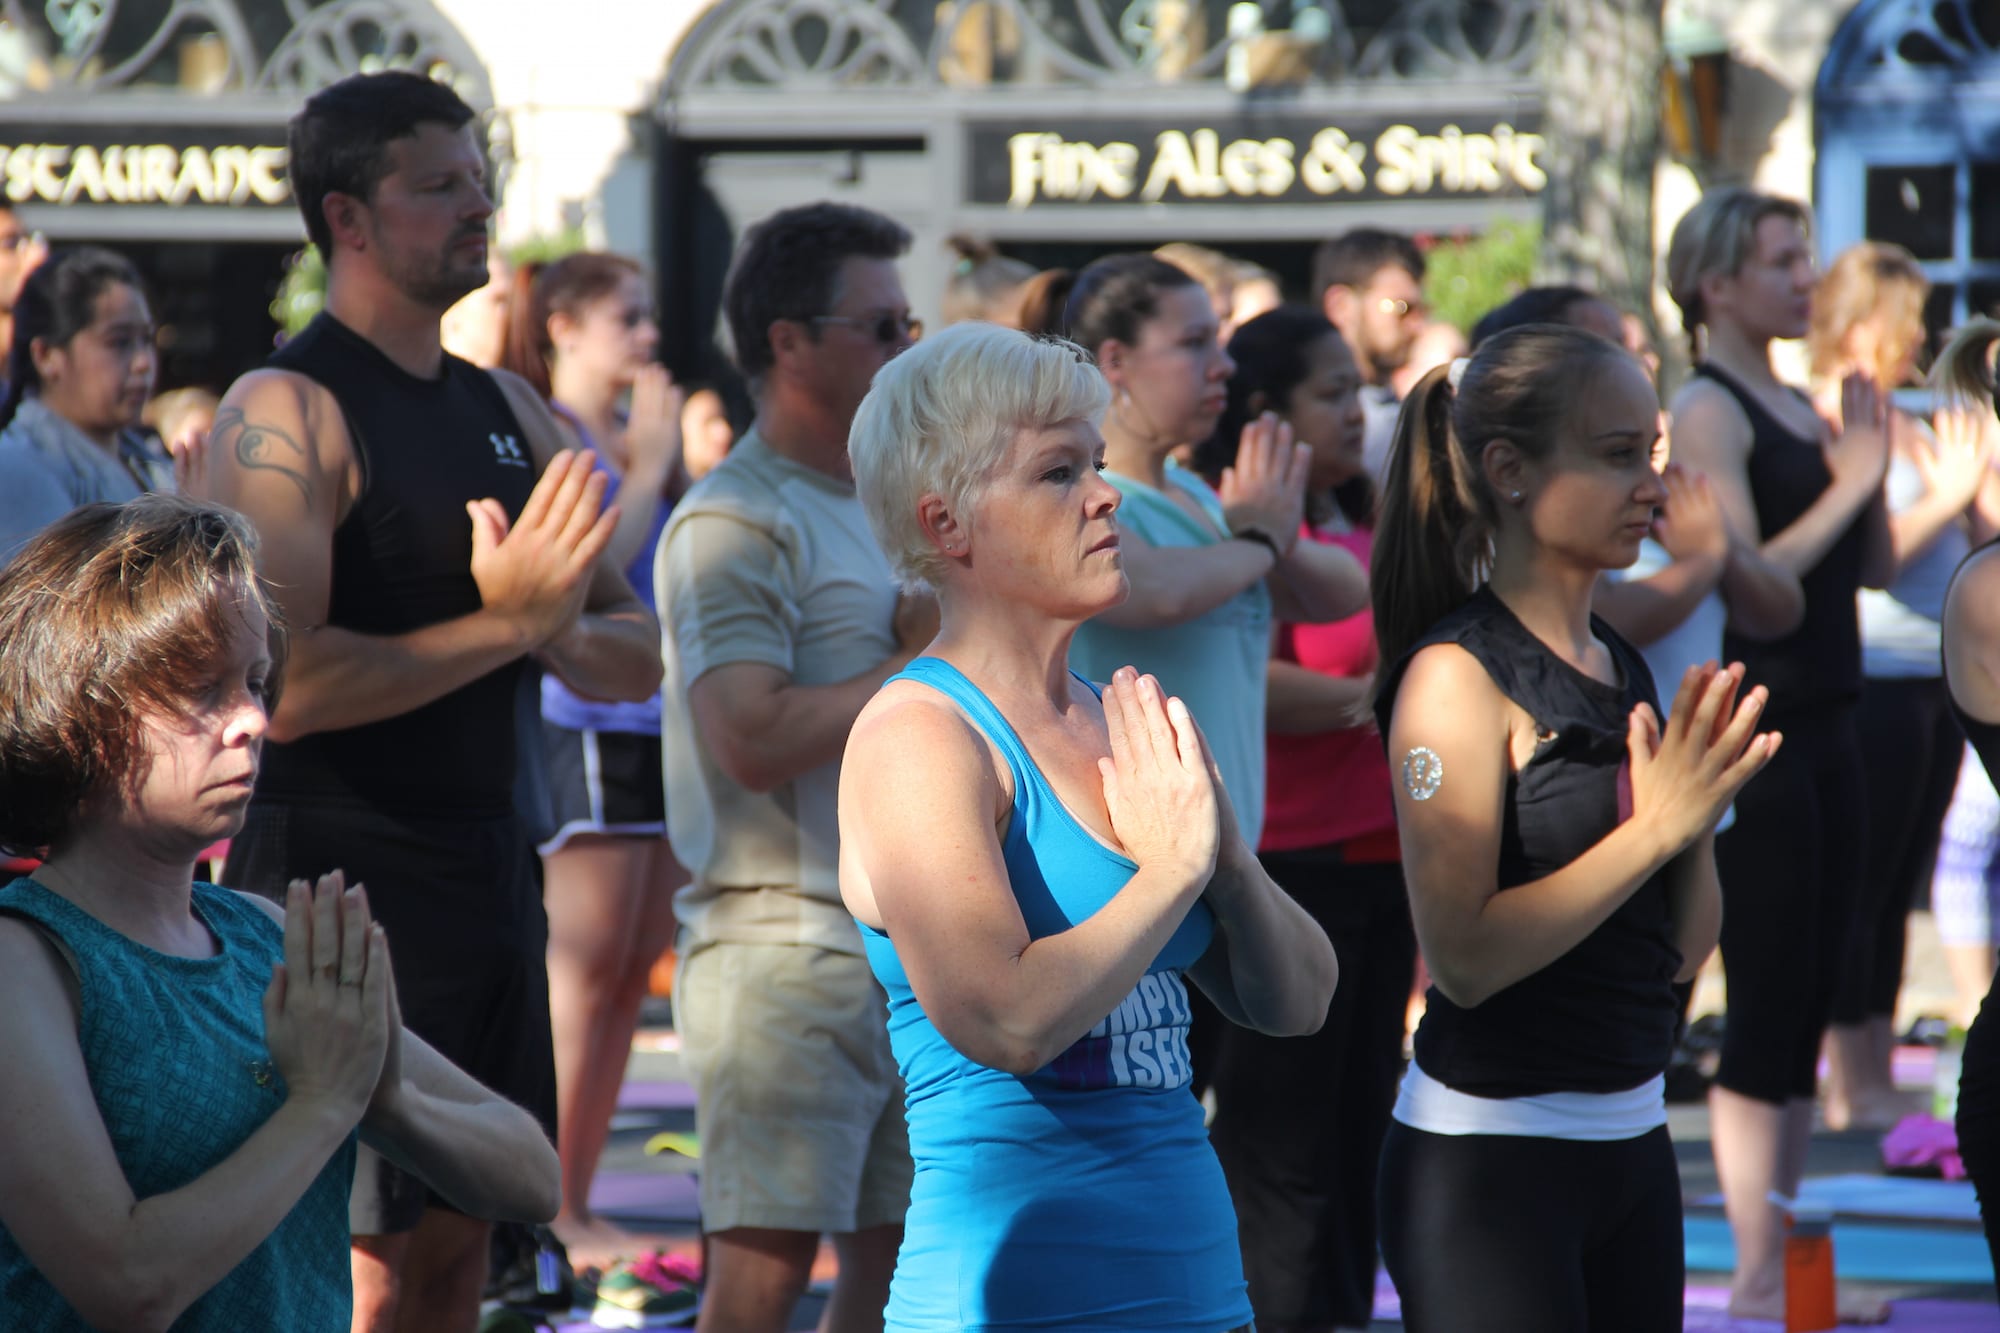 Om Street 2015, presented by West Hartford Yoga on LaSalle Road, July 25, 2015. Photo by Amy Melvin